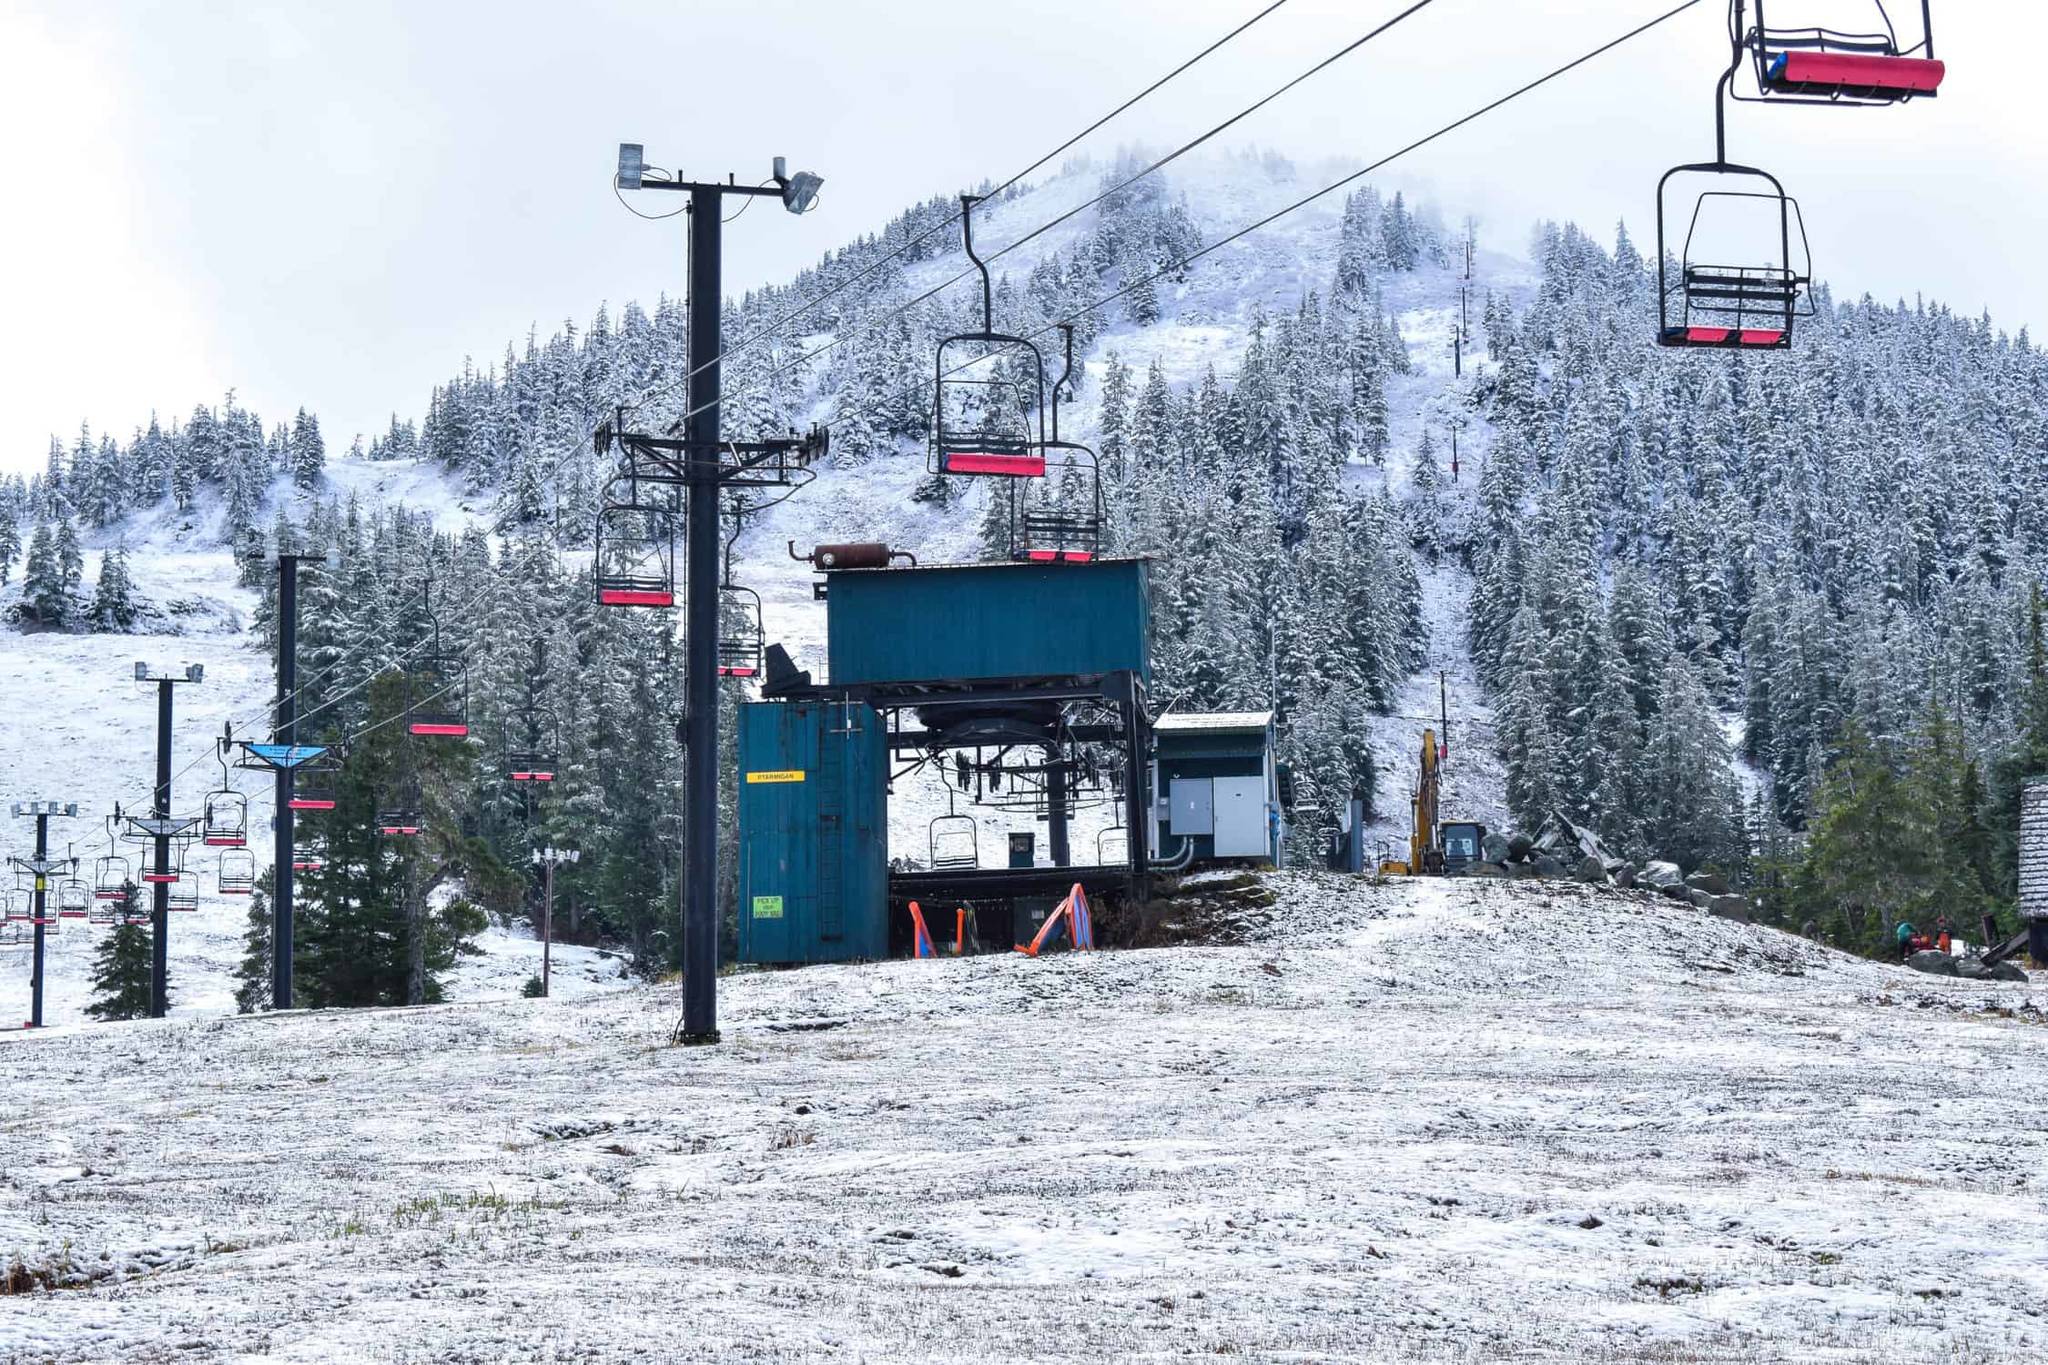 Eaglecrest Ski Area is preparing for a winter sports season in the time of the coronavirus with a planned opening date of Dec. 5, 2020. (Courtesy photo / Charlie Herrington)